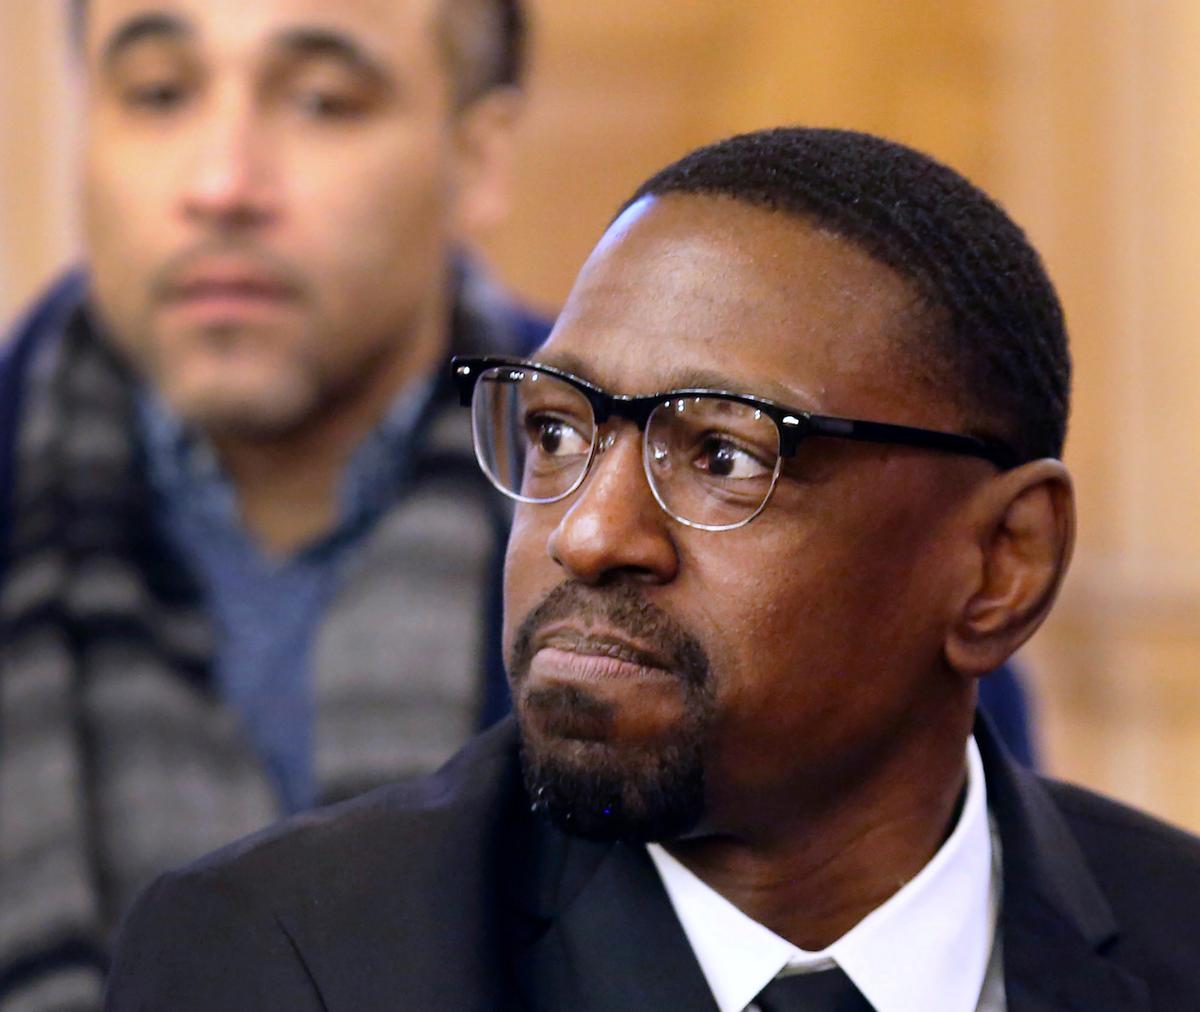 Lamonte McIntyre, convicted of a 1994 double homicide in Kansas City, Kan., was incarcerated for 23 years in Kansas prisons before released in October when the case against him was dismissed. (Topeka Capital-Journal, Thad Allton/AP)